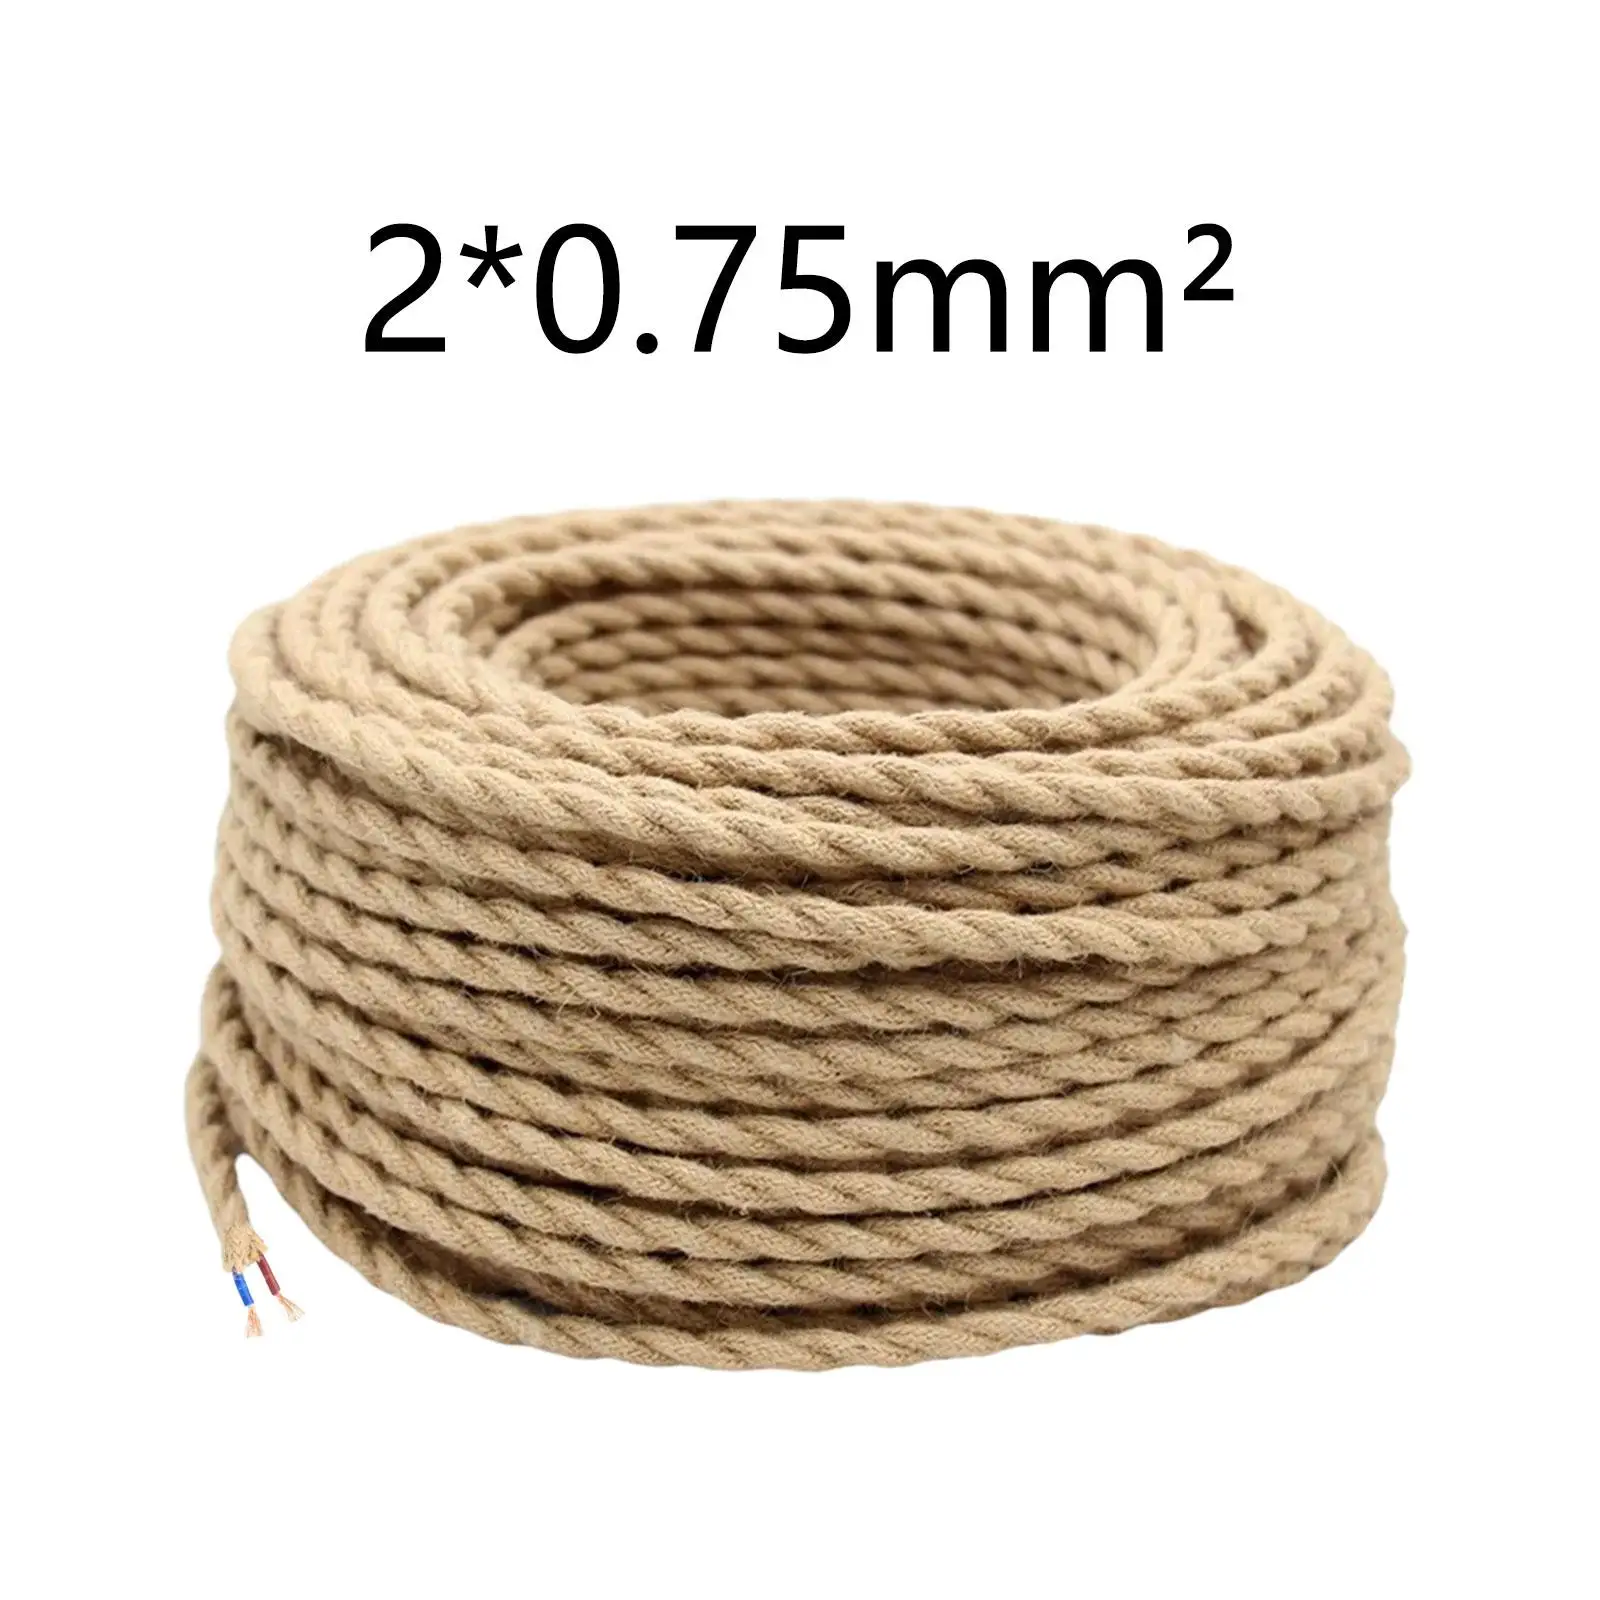 Twisted Braided Linen Line Antique 2x0.75mm Vintage Electrical Wire for Bedroom DIY Projects Farmhouse Industrial Lighting Bar